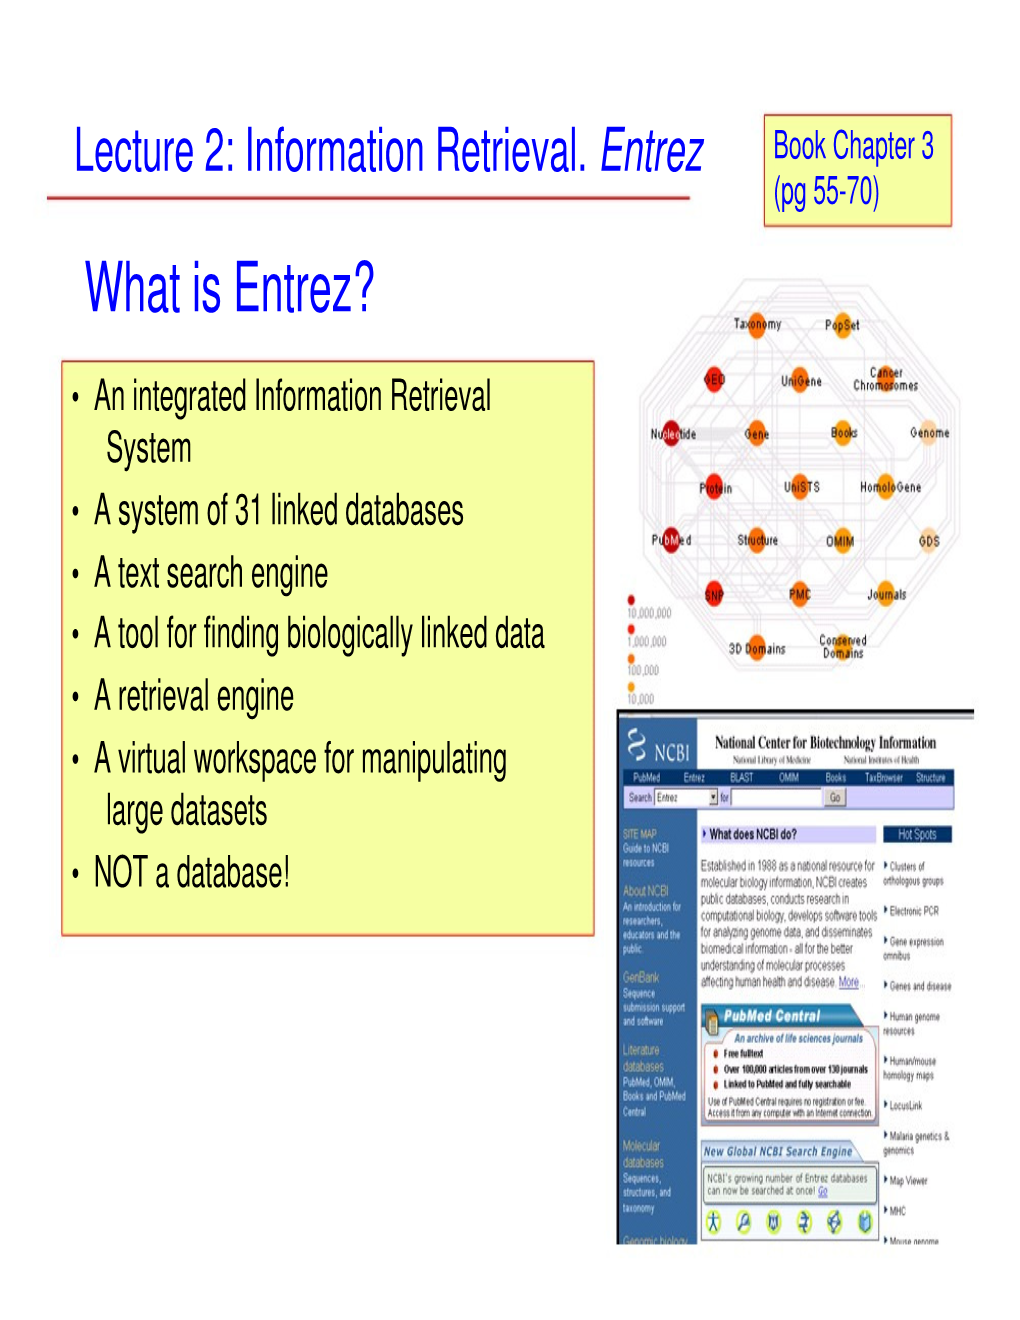 What Is Entrez?